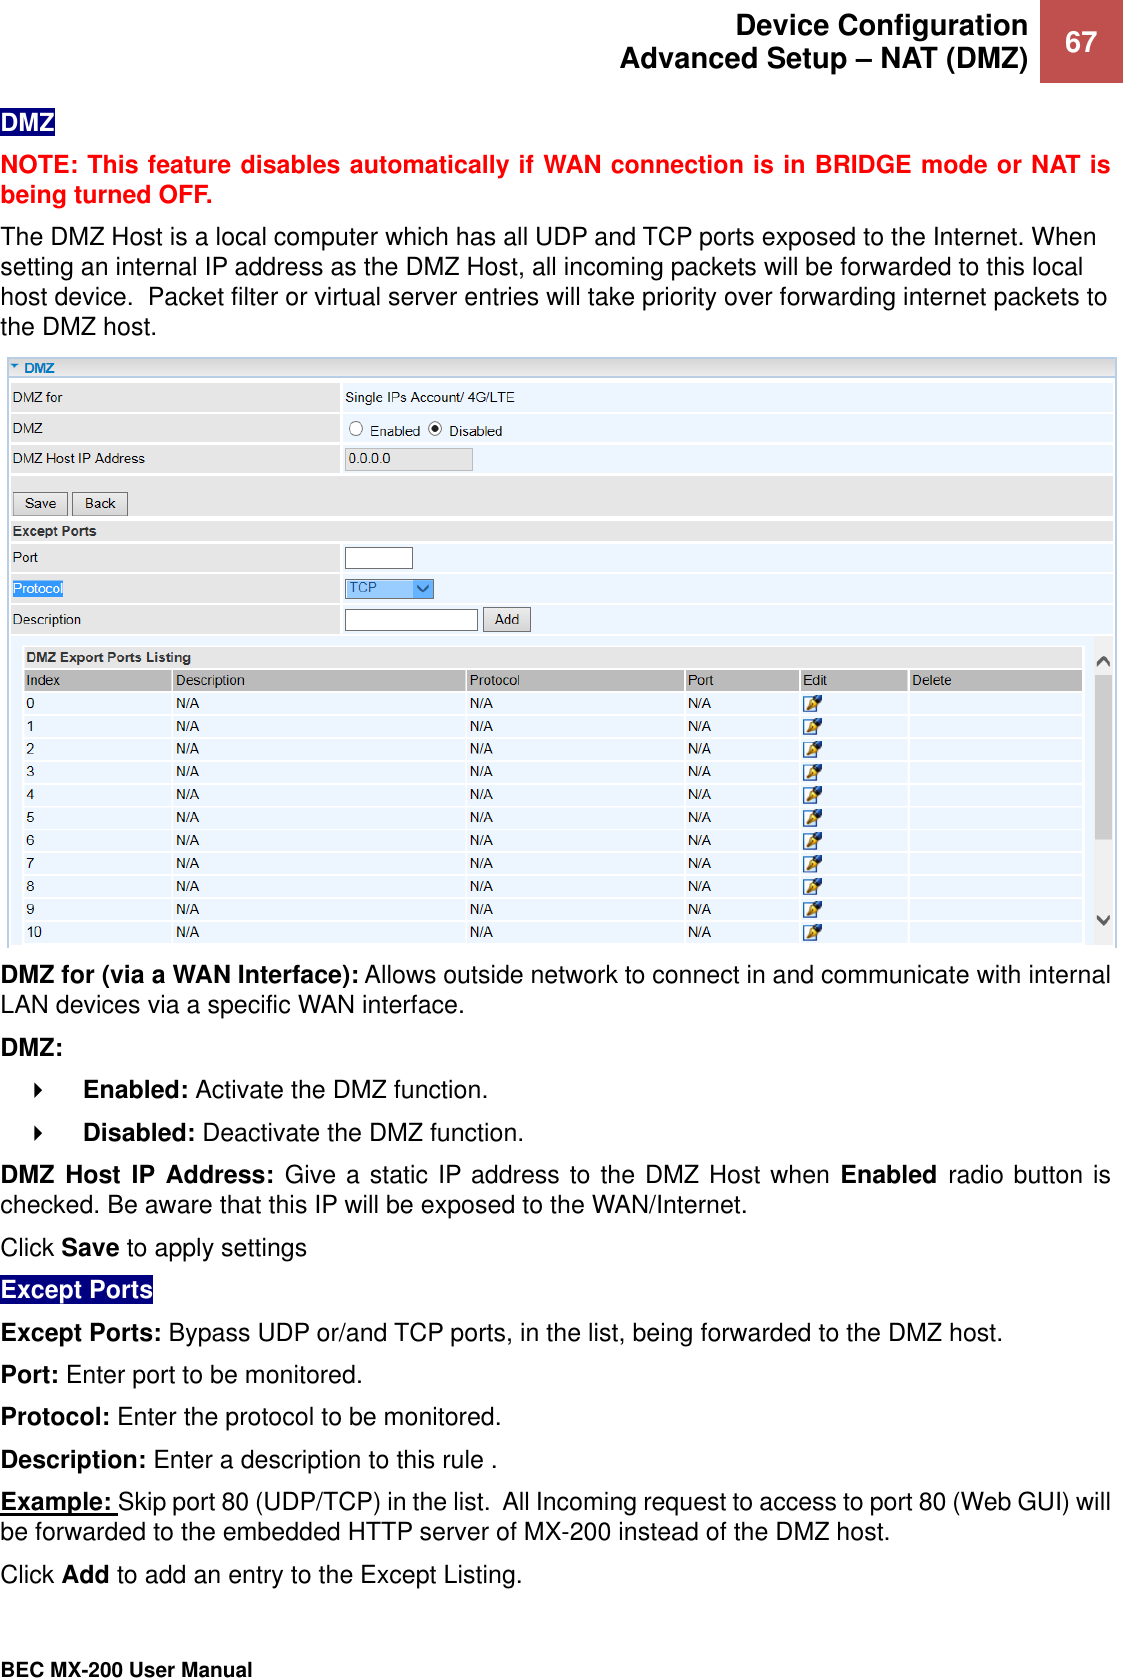  Device Configuration Advanced Setup – NAT (DMZ) 67   BEC MX-200 User Manual  DMZ NOTE: This feature disables automatically if WAN connection is in BRIDGE mode or NAT is being turned OFF. The DMZ Host is a local computer which has all UDP and TCP ports exposed to the Internet. When setting an internal IP address as the DMZ Host, all incoming packets will be forwarded to this local host device.  Packet filter or virtual server entries will take priority over forwarding internet packets to the DMZ host.   DMZ for (via a WAN Interface): Allows outside network to connect in and communicate with internal LAN devices via a specific WAN interface. DMZ:     Enabled: Activate the DMZ function.      Disabled: Deactivate the DMZ function.   DMZ Host  IP Address: Give a static IP address to the DMZ Host when Enabled  radio button is checked. Be aware that this IP will be exposed to the WAN/Internet. Click Save to apply settings Except Ports Except Ports: Bypass UDP or/and TCP ports, in the list, being forwarded to the DMZ host. Port: Enter port to be monitored. Protocol: Enter the protocol to be monitored. Description: Enter a description to this rule . Example: Skip port 80 (UDP/TCP) in the list.  All Incoming request to access to port 80 (Web GUI) will be forwarded to the embedded HTTP server of MX-200 instead of the DMZ host.  Click Add to add an entry to the Except Listing. 